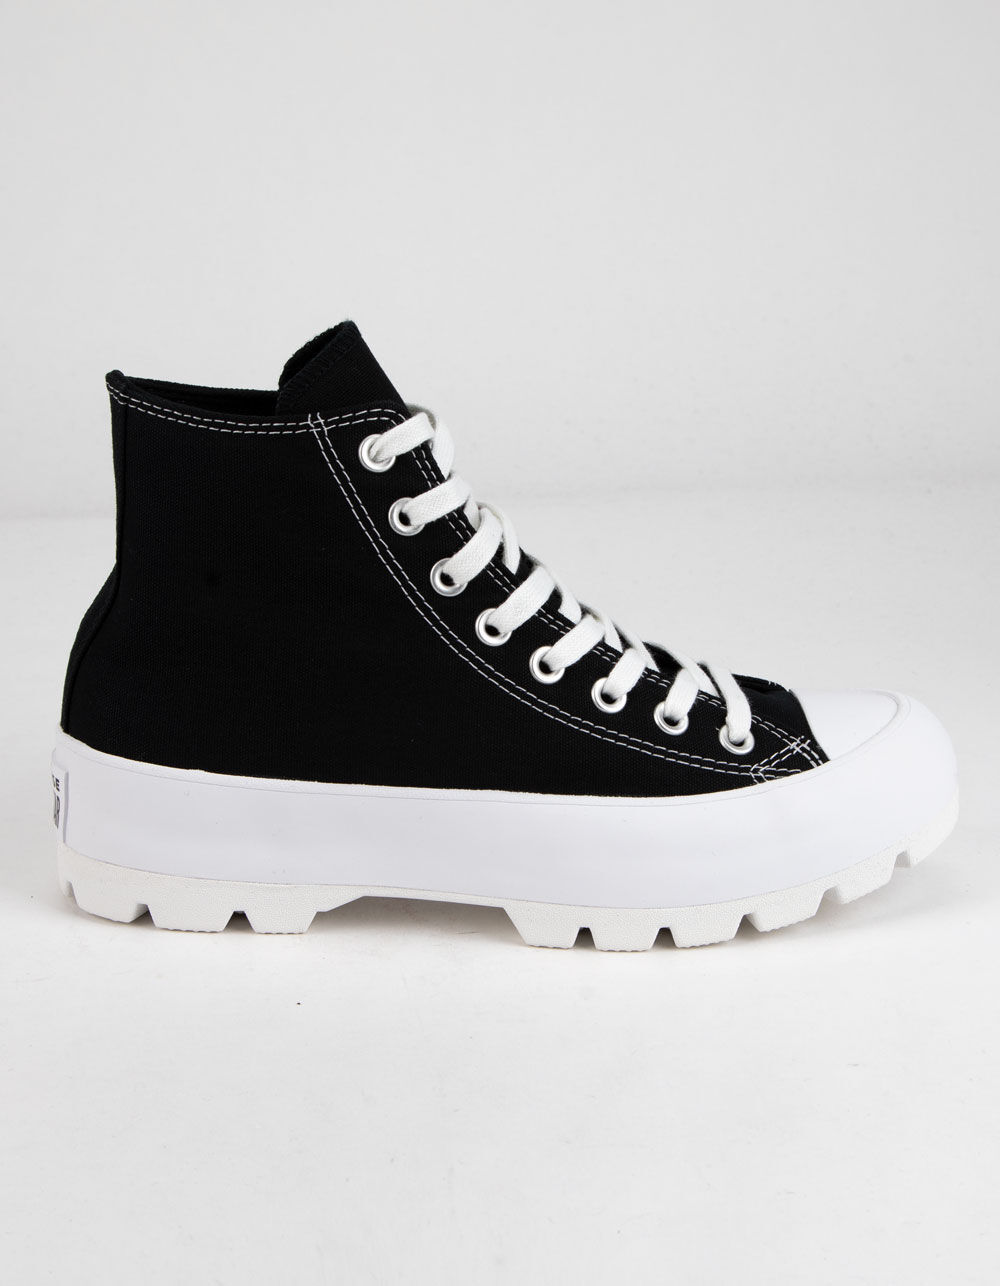 CONVERSE Chuck Taylor All Star Lugged Black and White Womens High Tops